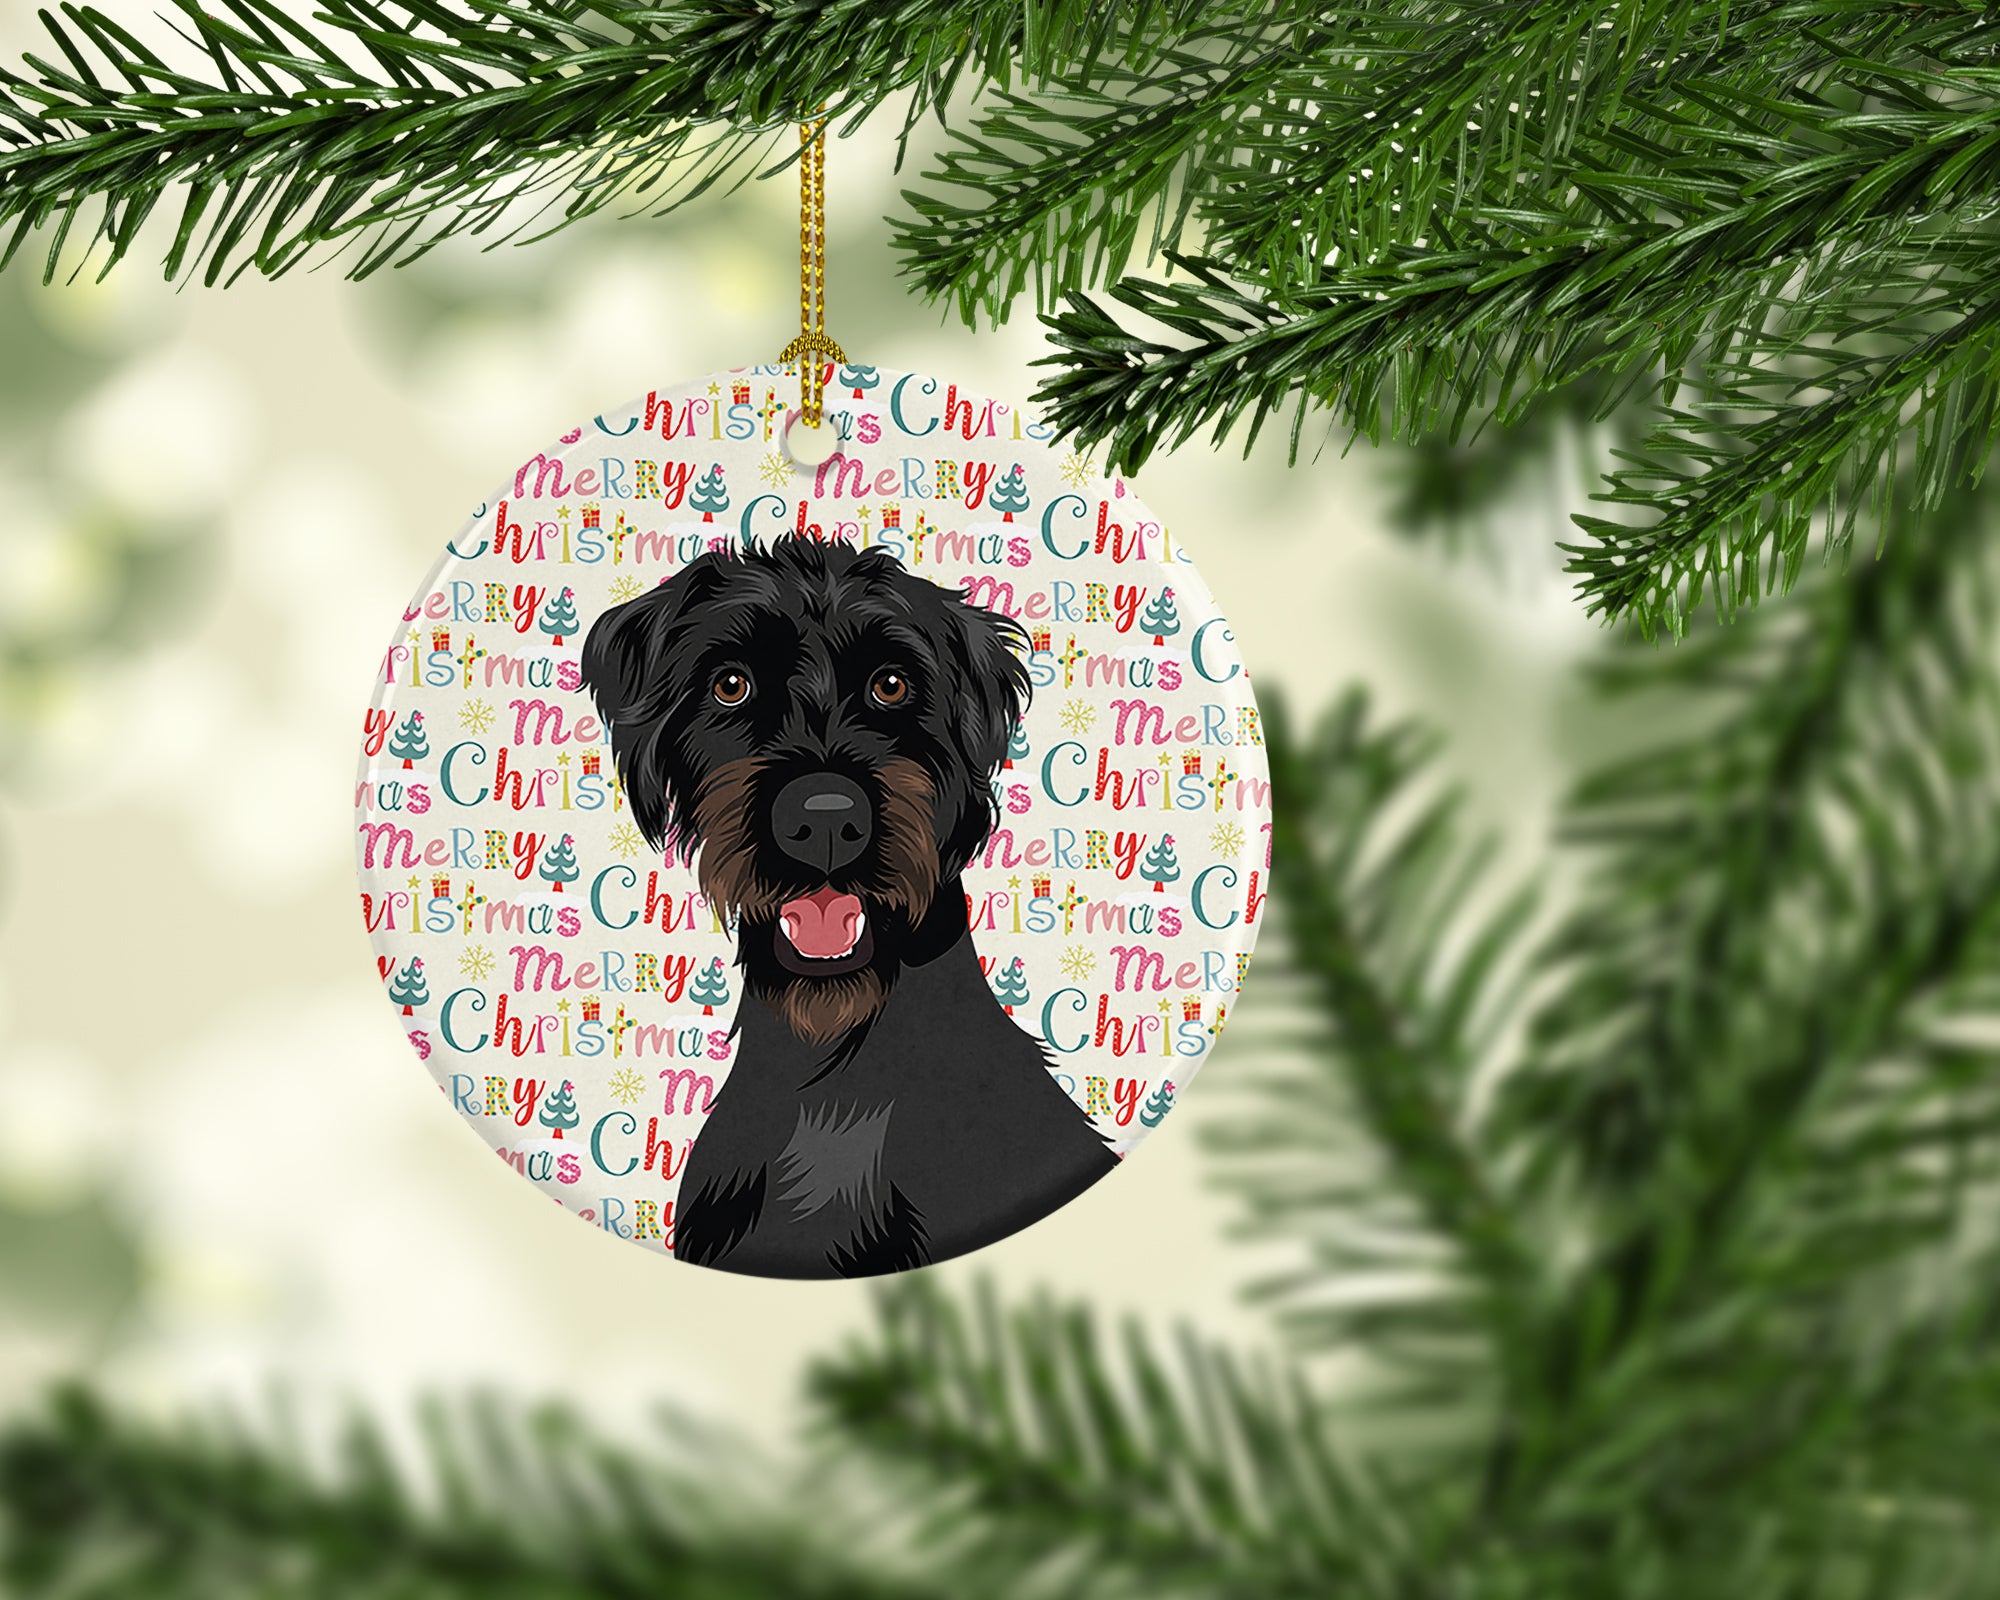 Buy this Doodle Black and Tan Christmas Ceramic Ornament